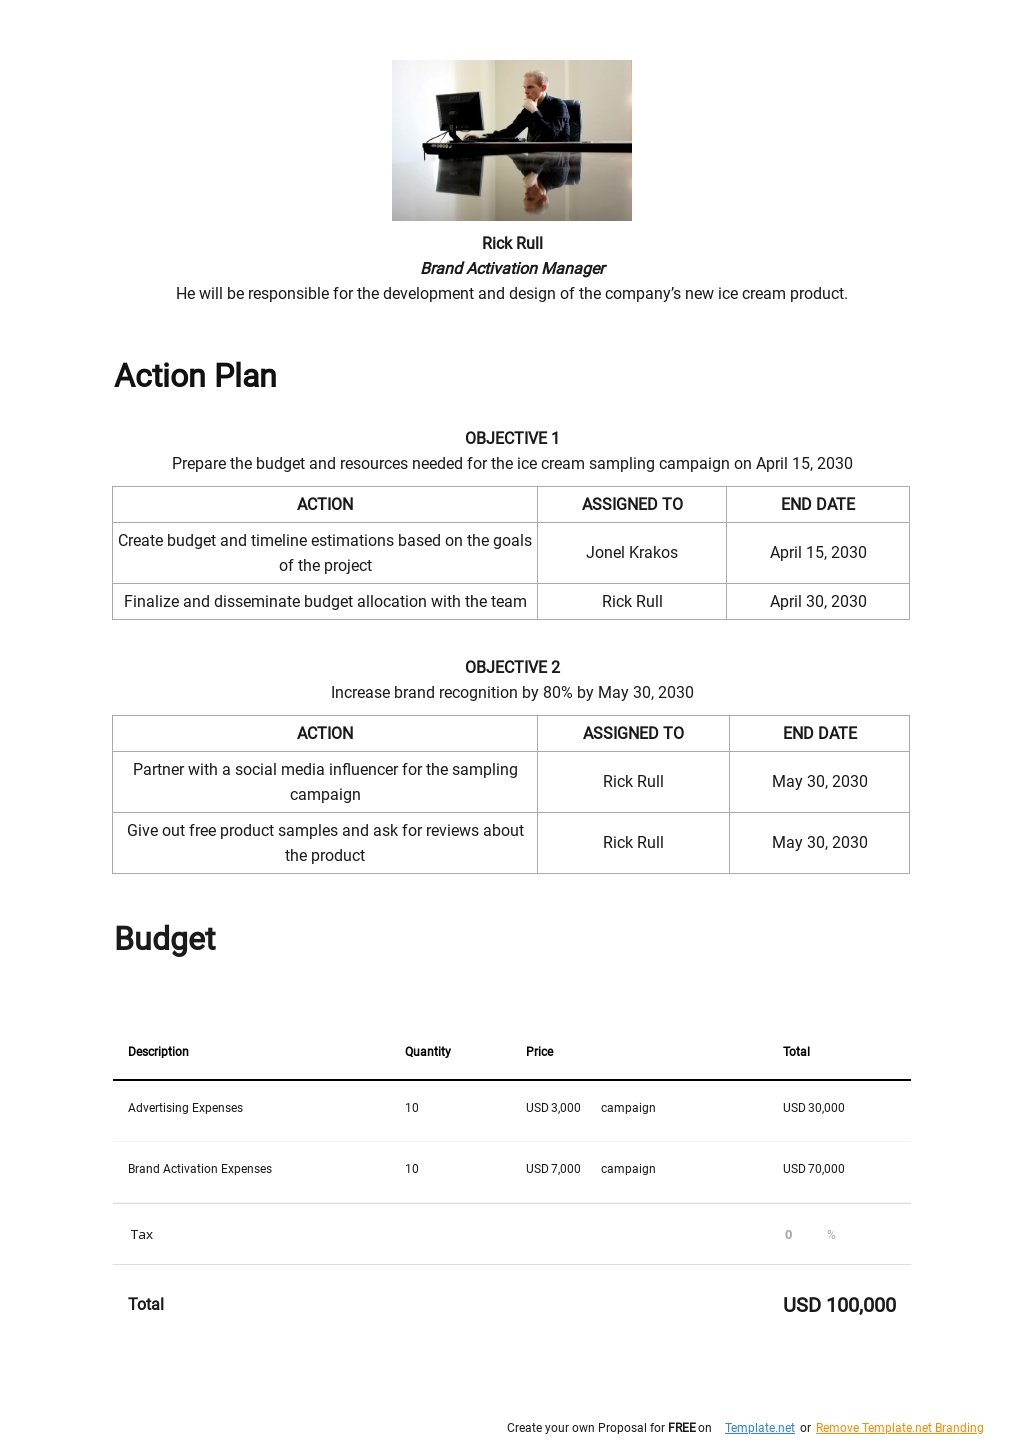 Brand Activation Plan Template in Google Docs, Word